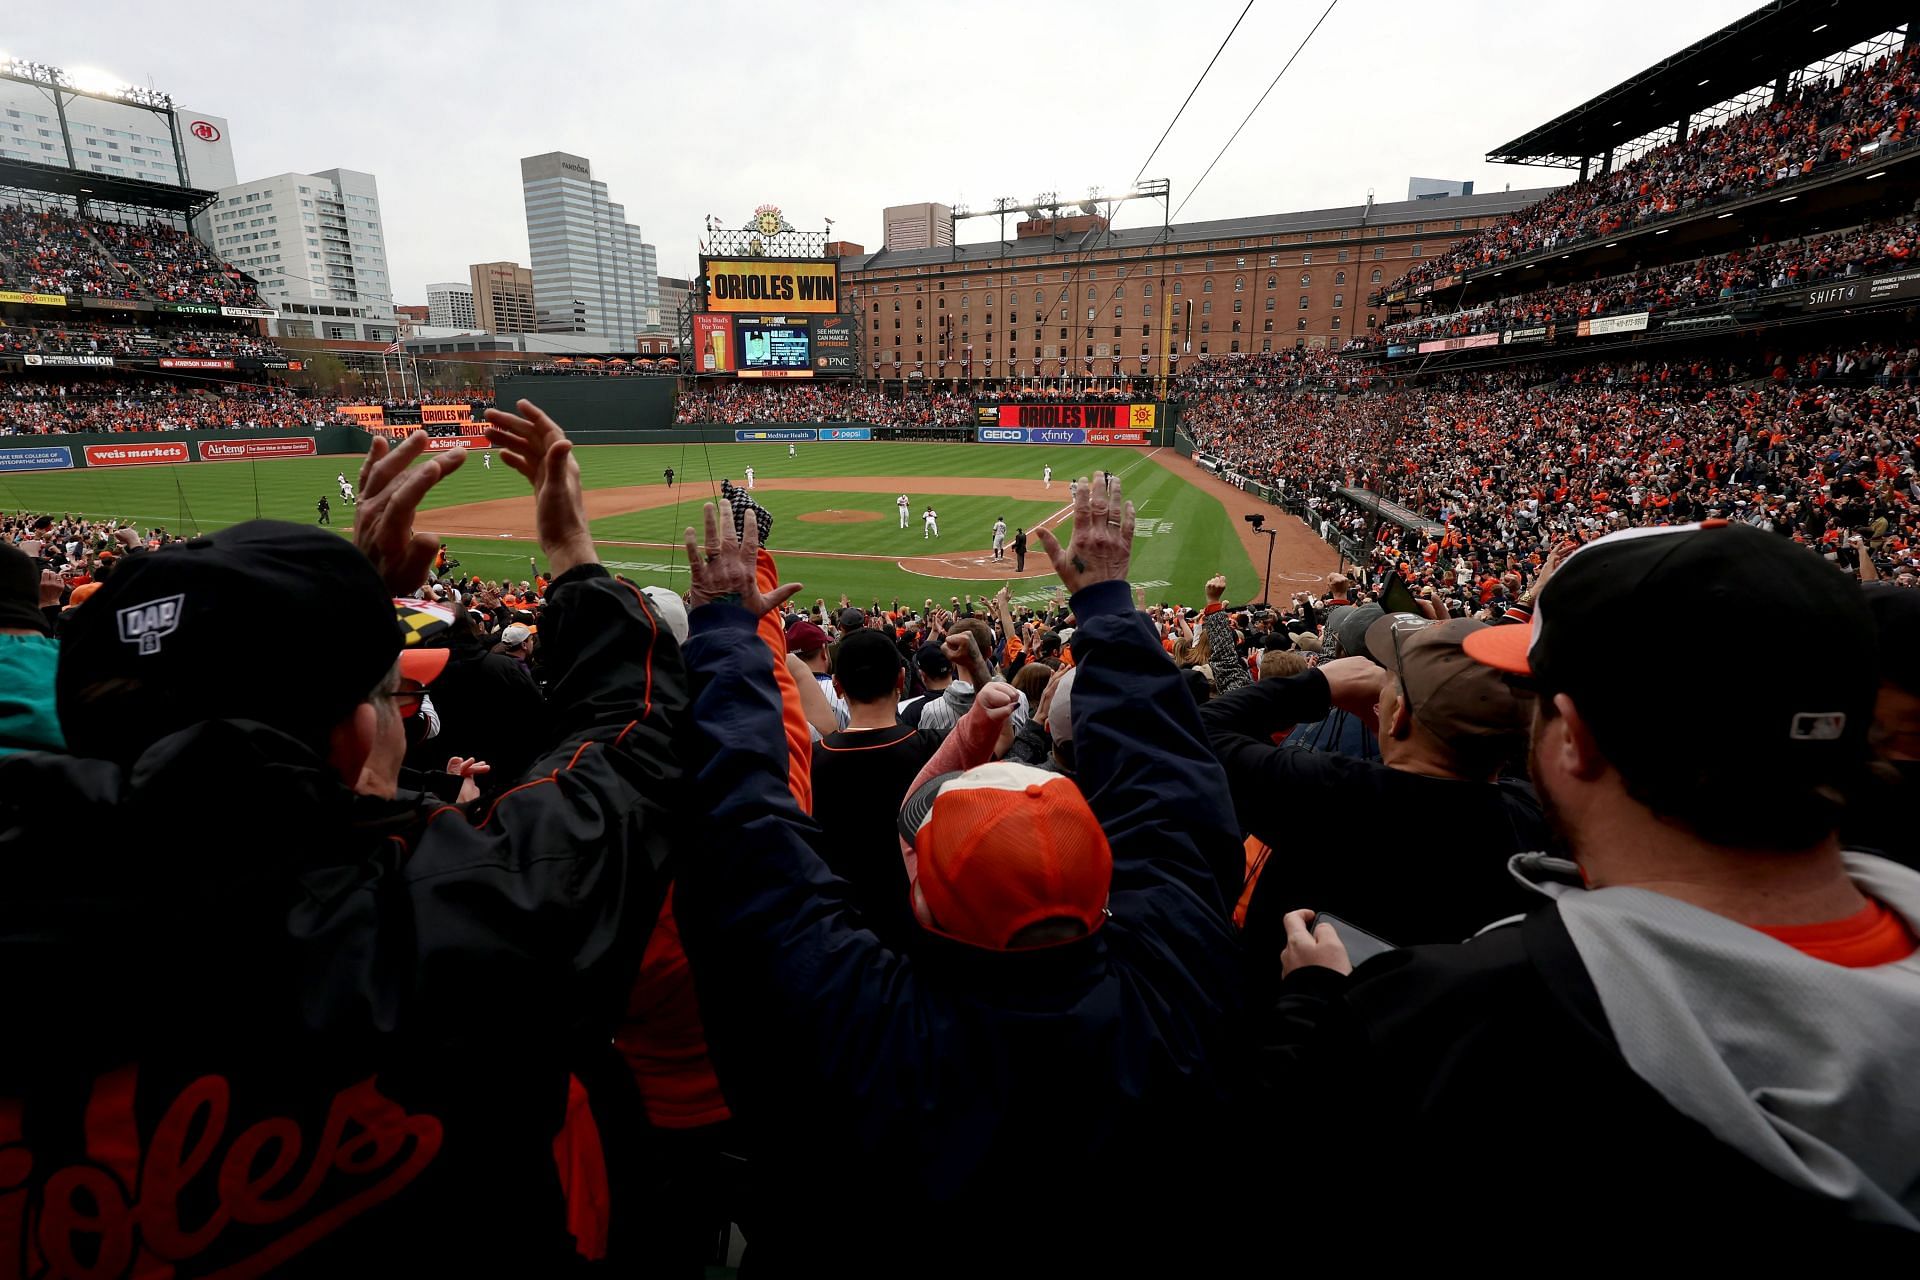 Fans celebrate after Baltimore Orioles defeated the New York Yankees 7-6 during the Orioles home opener